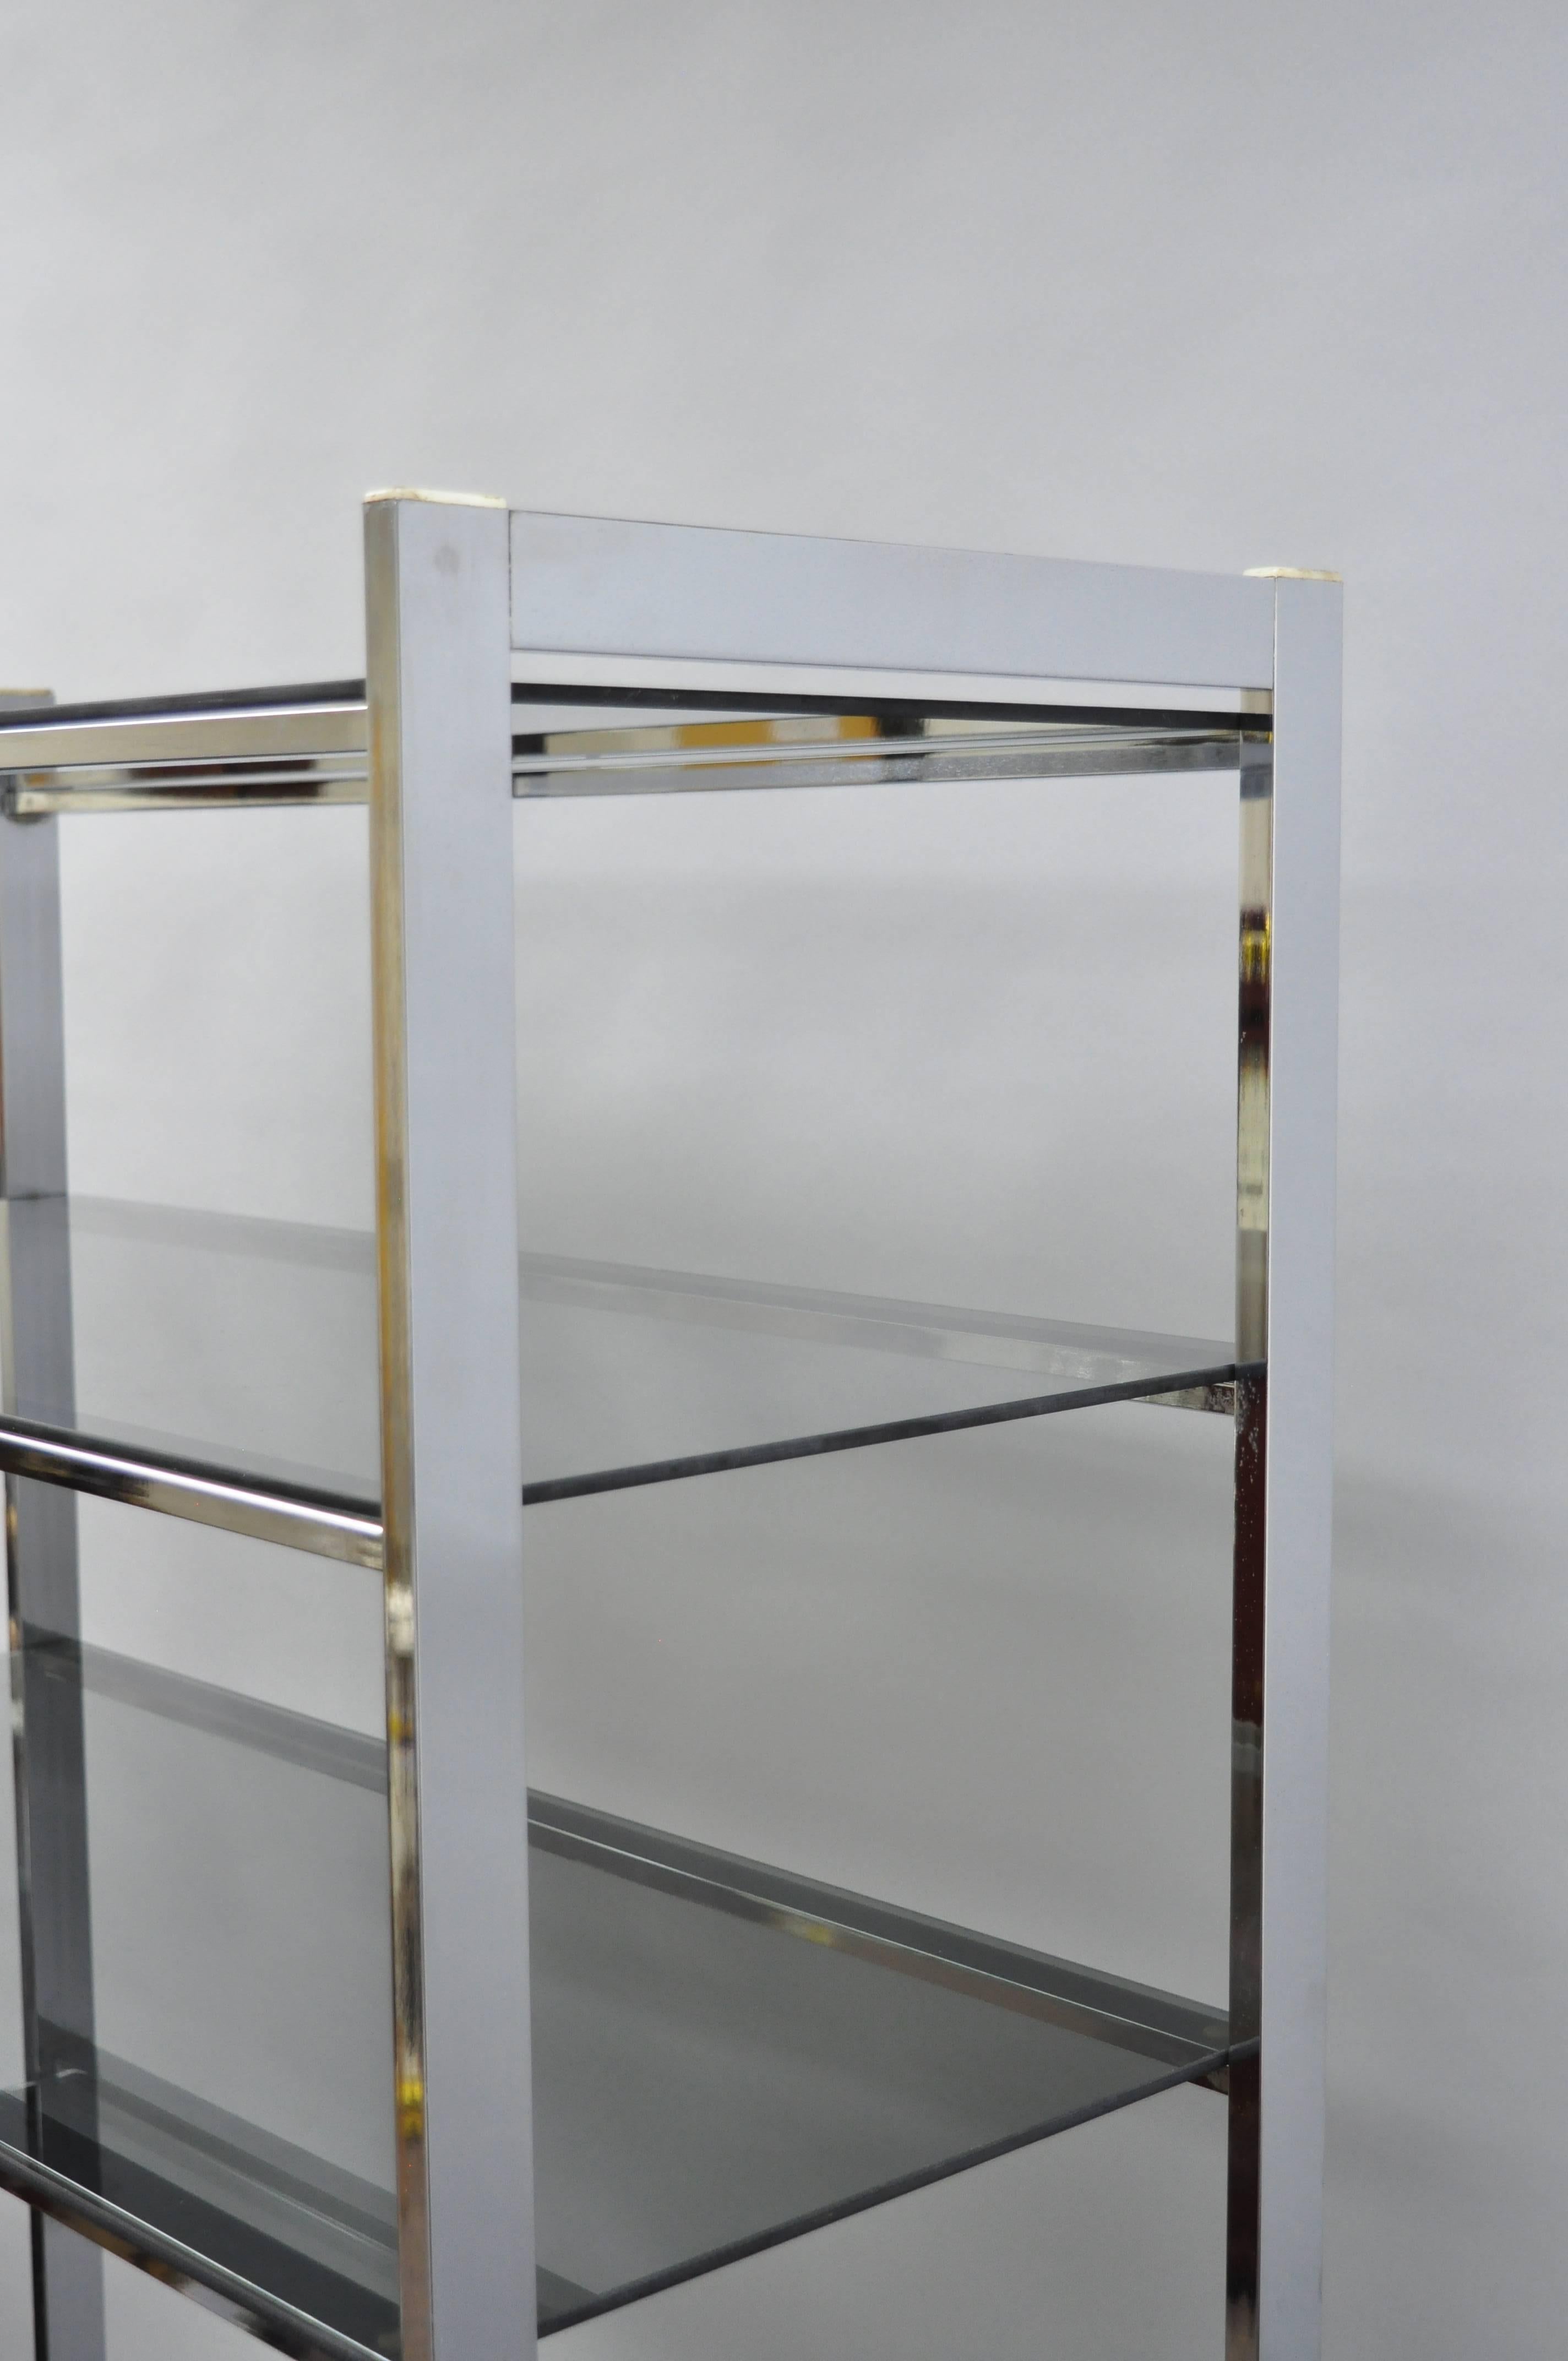 Late 20th Century Mid-Century Modern Chrome Smoked Glass Étagère Bookcase Shelf Baughman Style For Sale